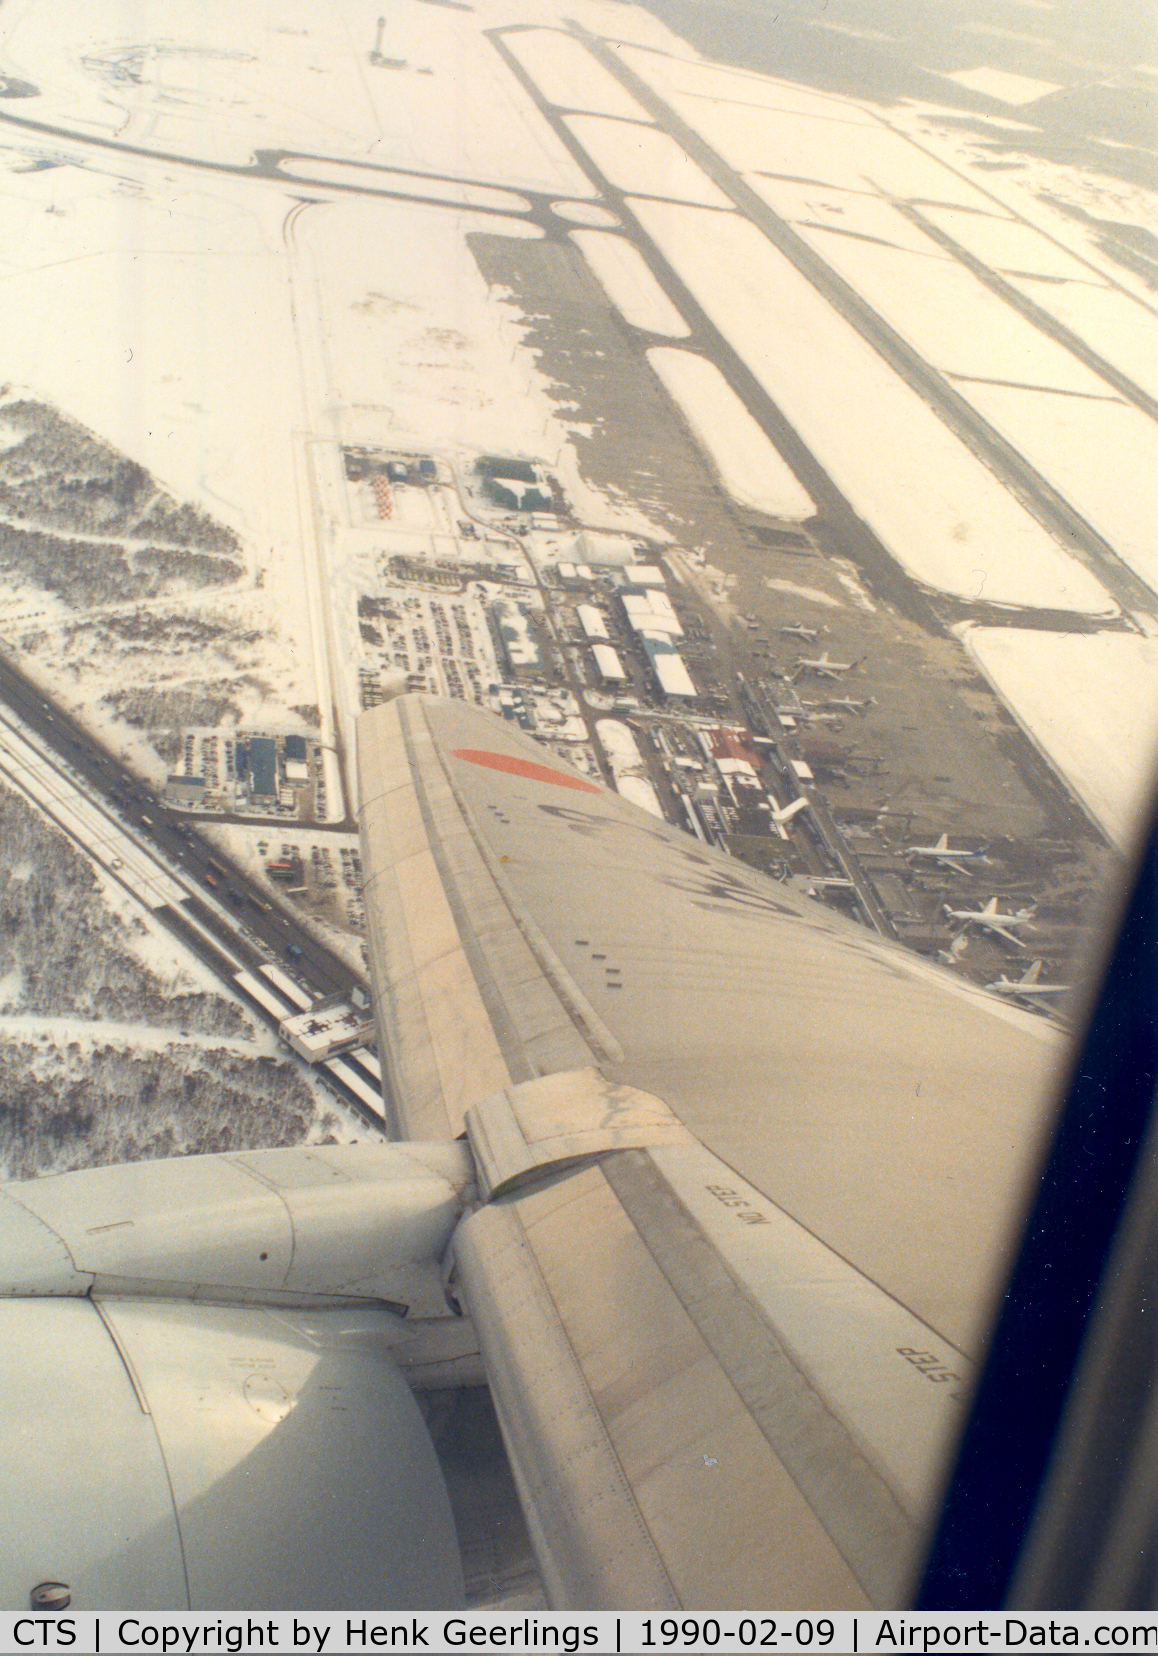 New Chitose Airport, Chitose, Hokkaido (near Sapporo) Japan (CTS) - Departure from Citose Airport on the way to Narita , Feb 1990